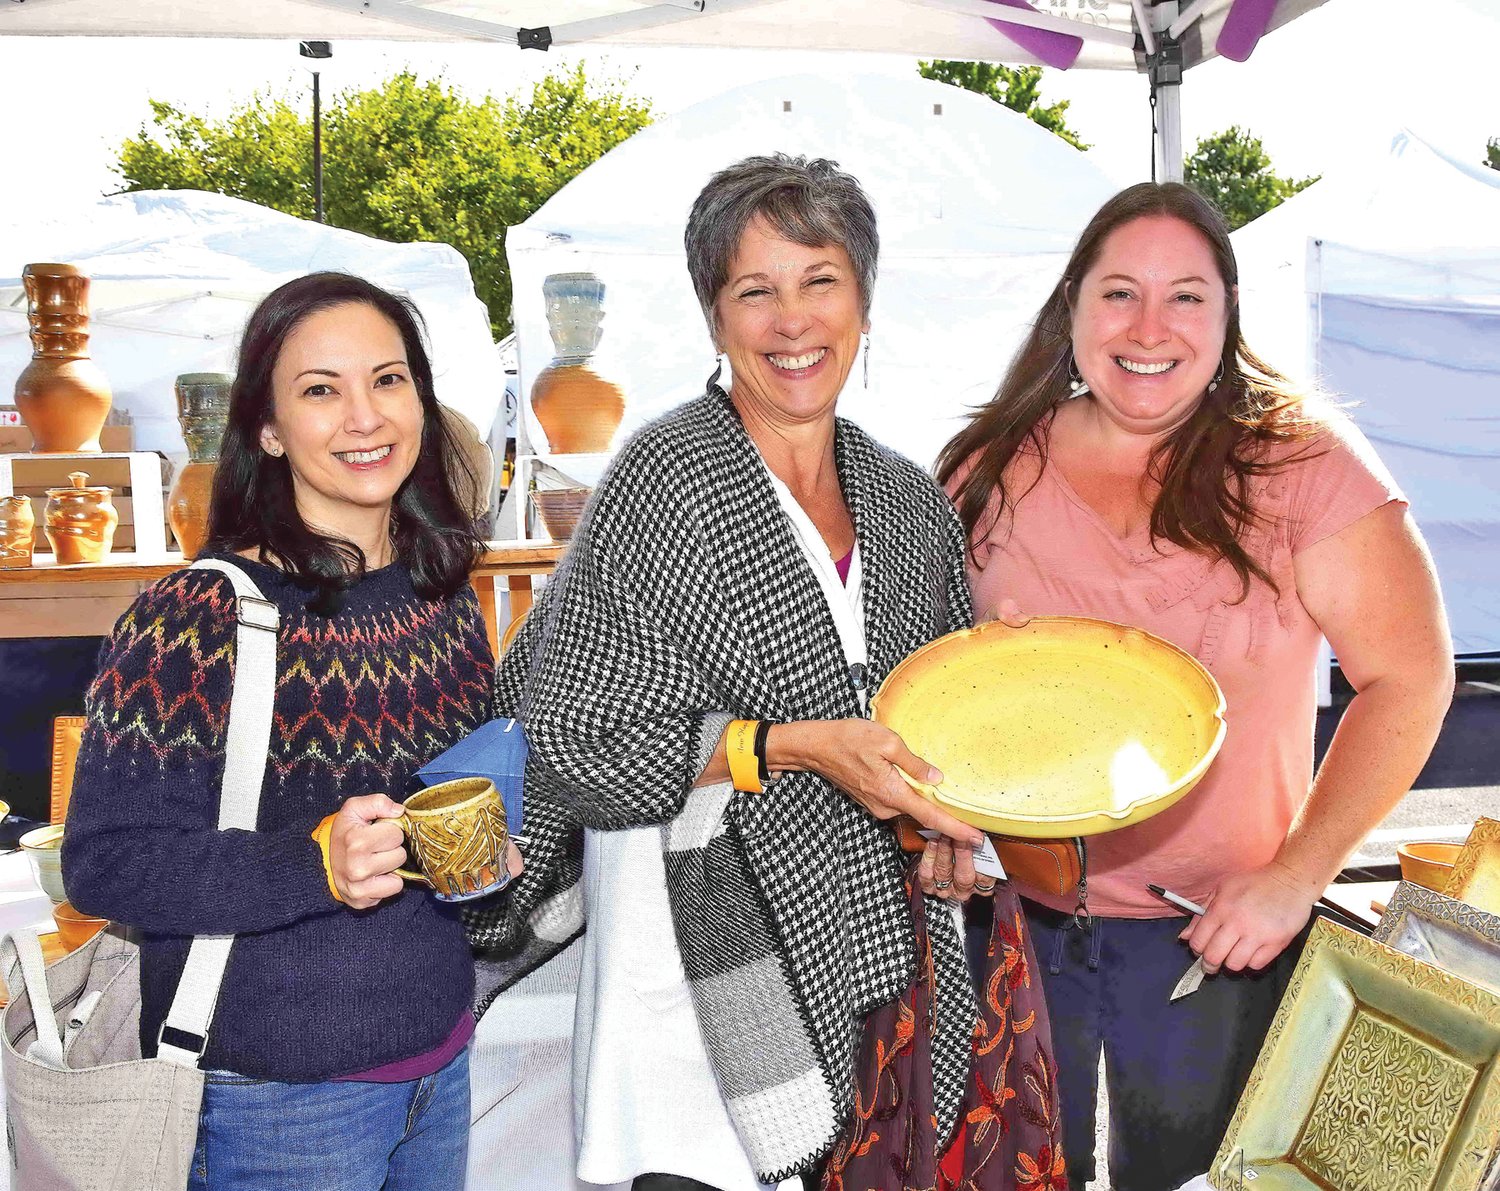 Visitors Elissa Vine and Lorrie Rogers with potter Jessica Greet and her Fairydust Pottery.